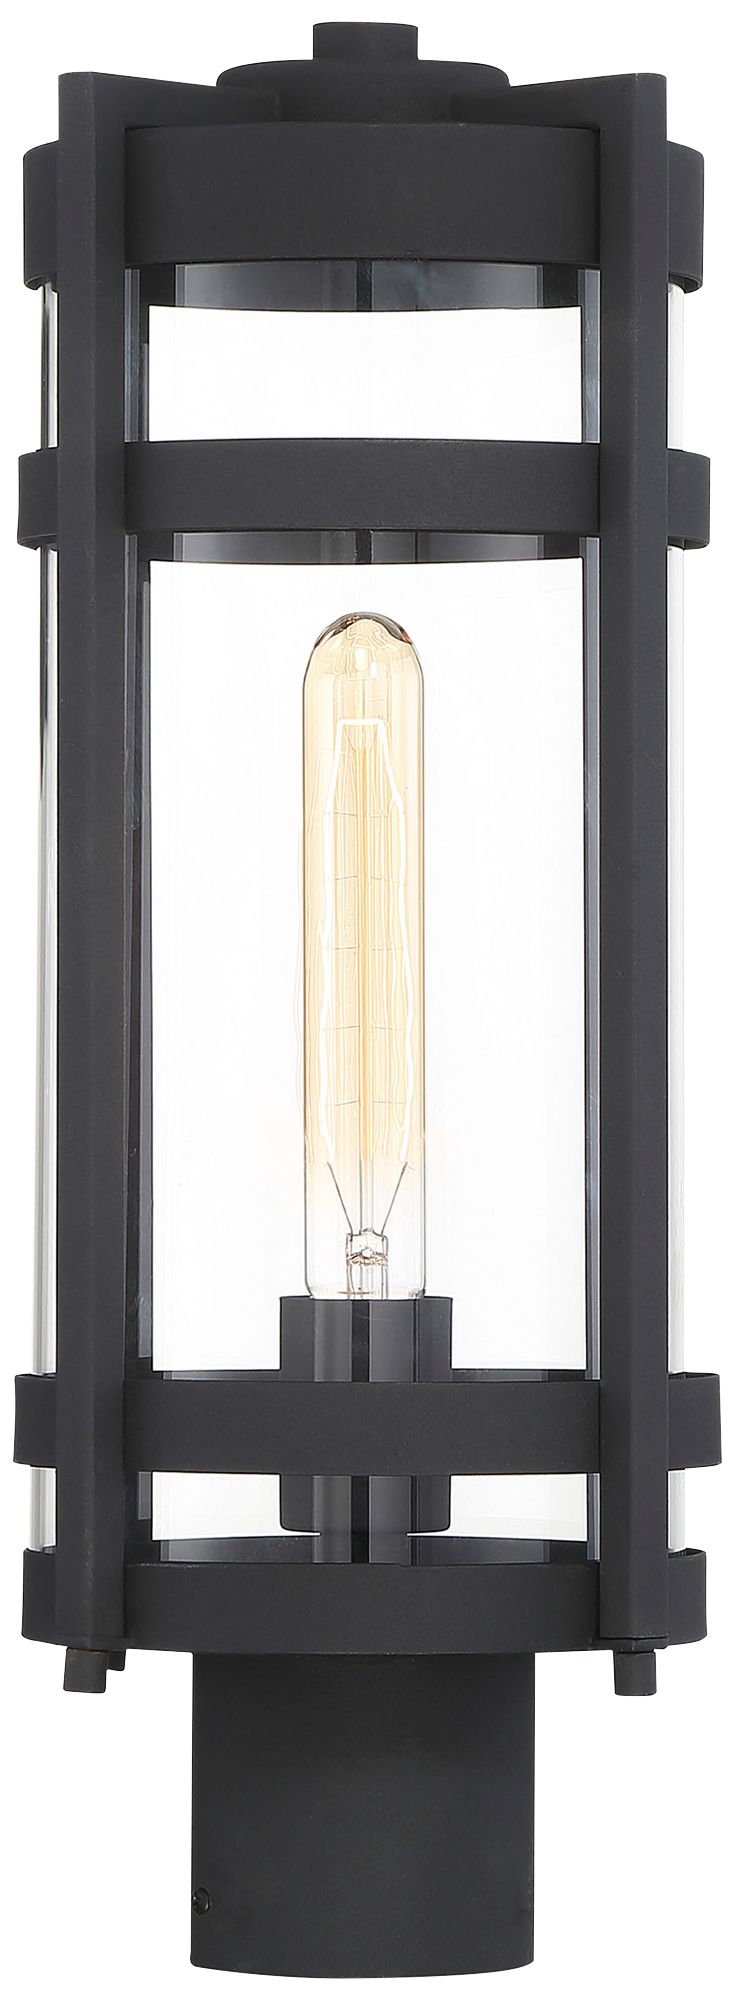 Tofino; 1 Light; Post Lantern; Textured Black Finish with Clear Glass